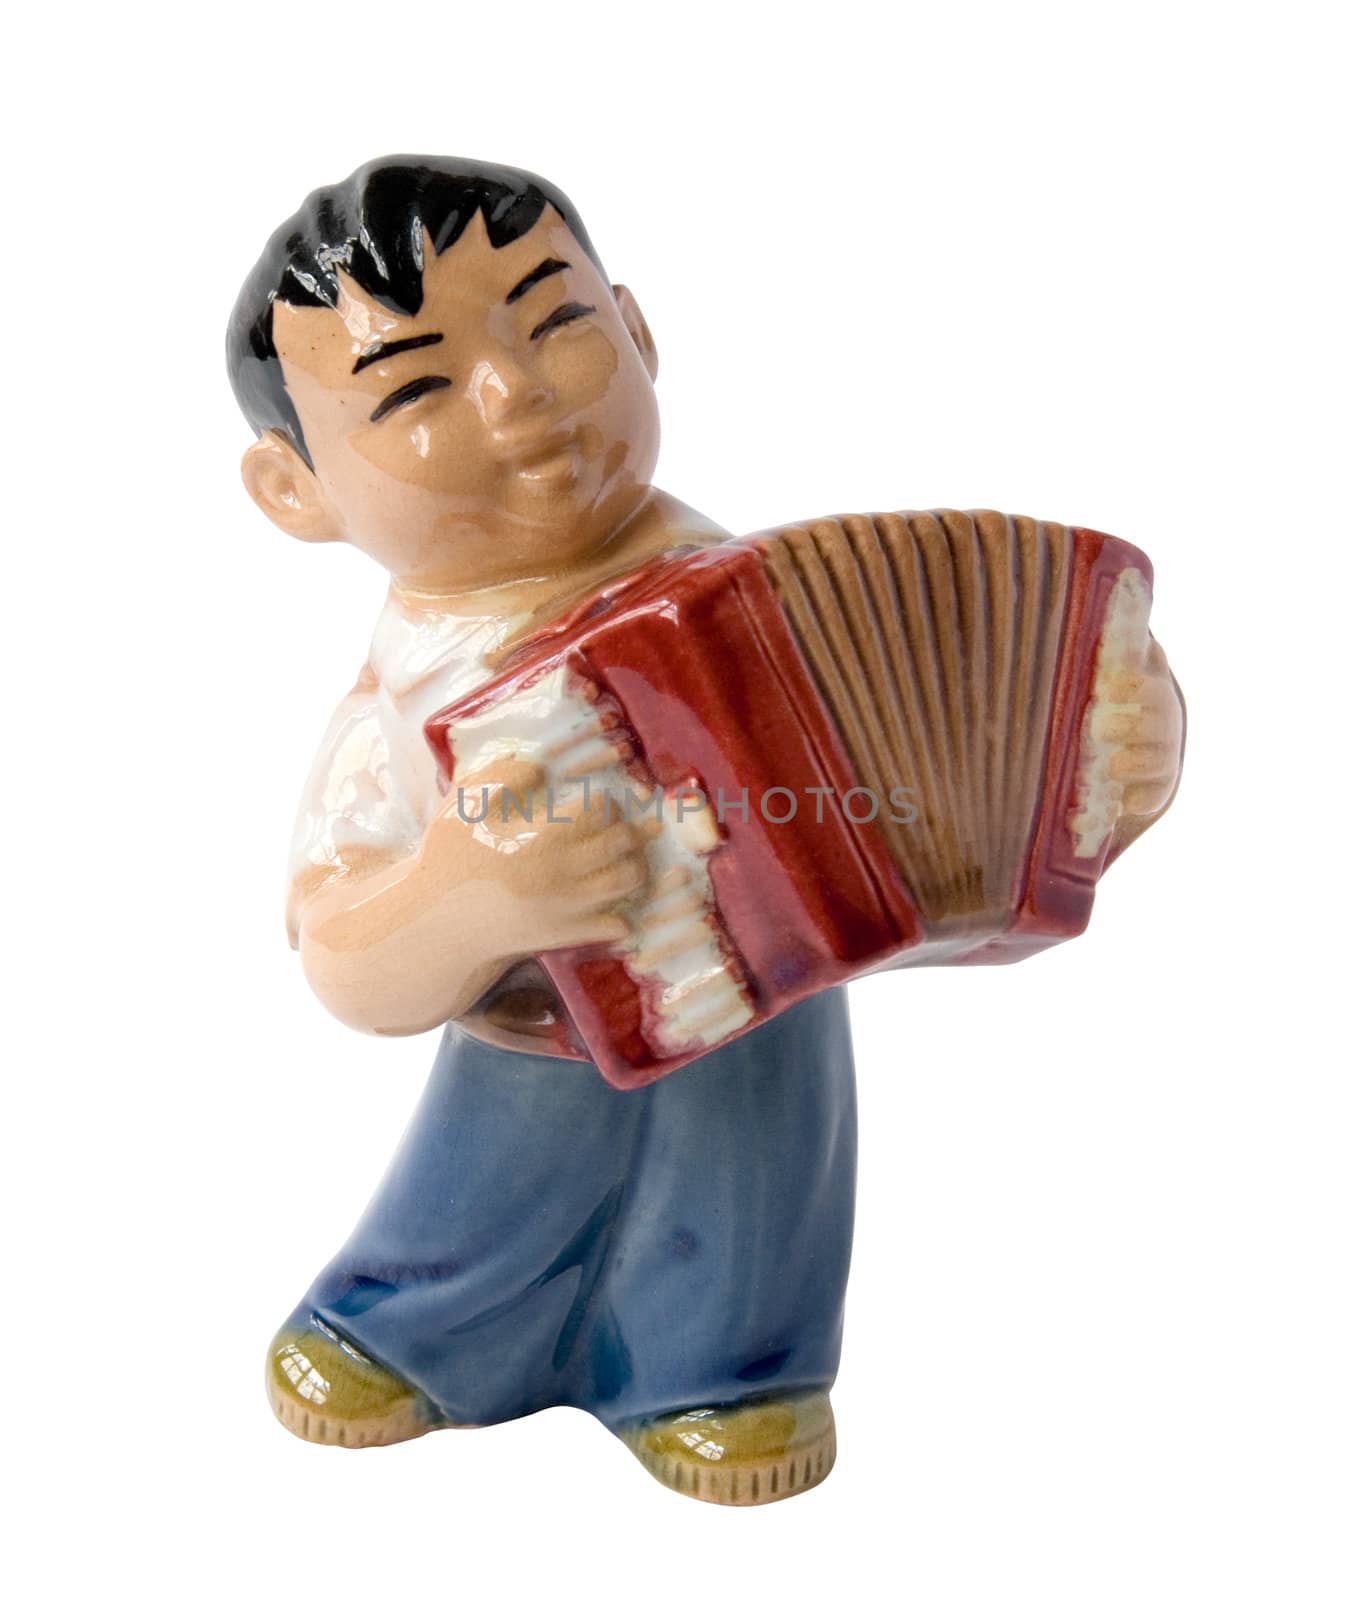 chinese accordion player by daboost